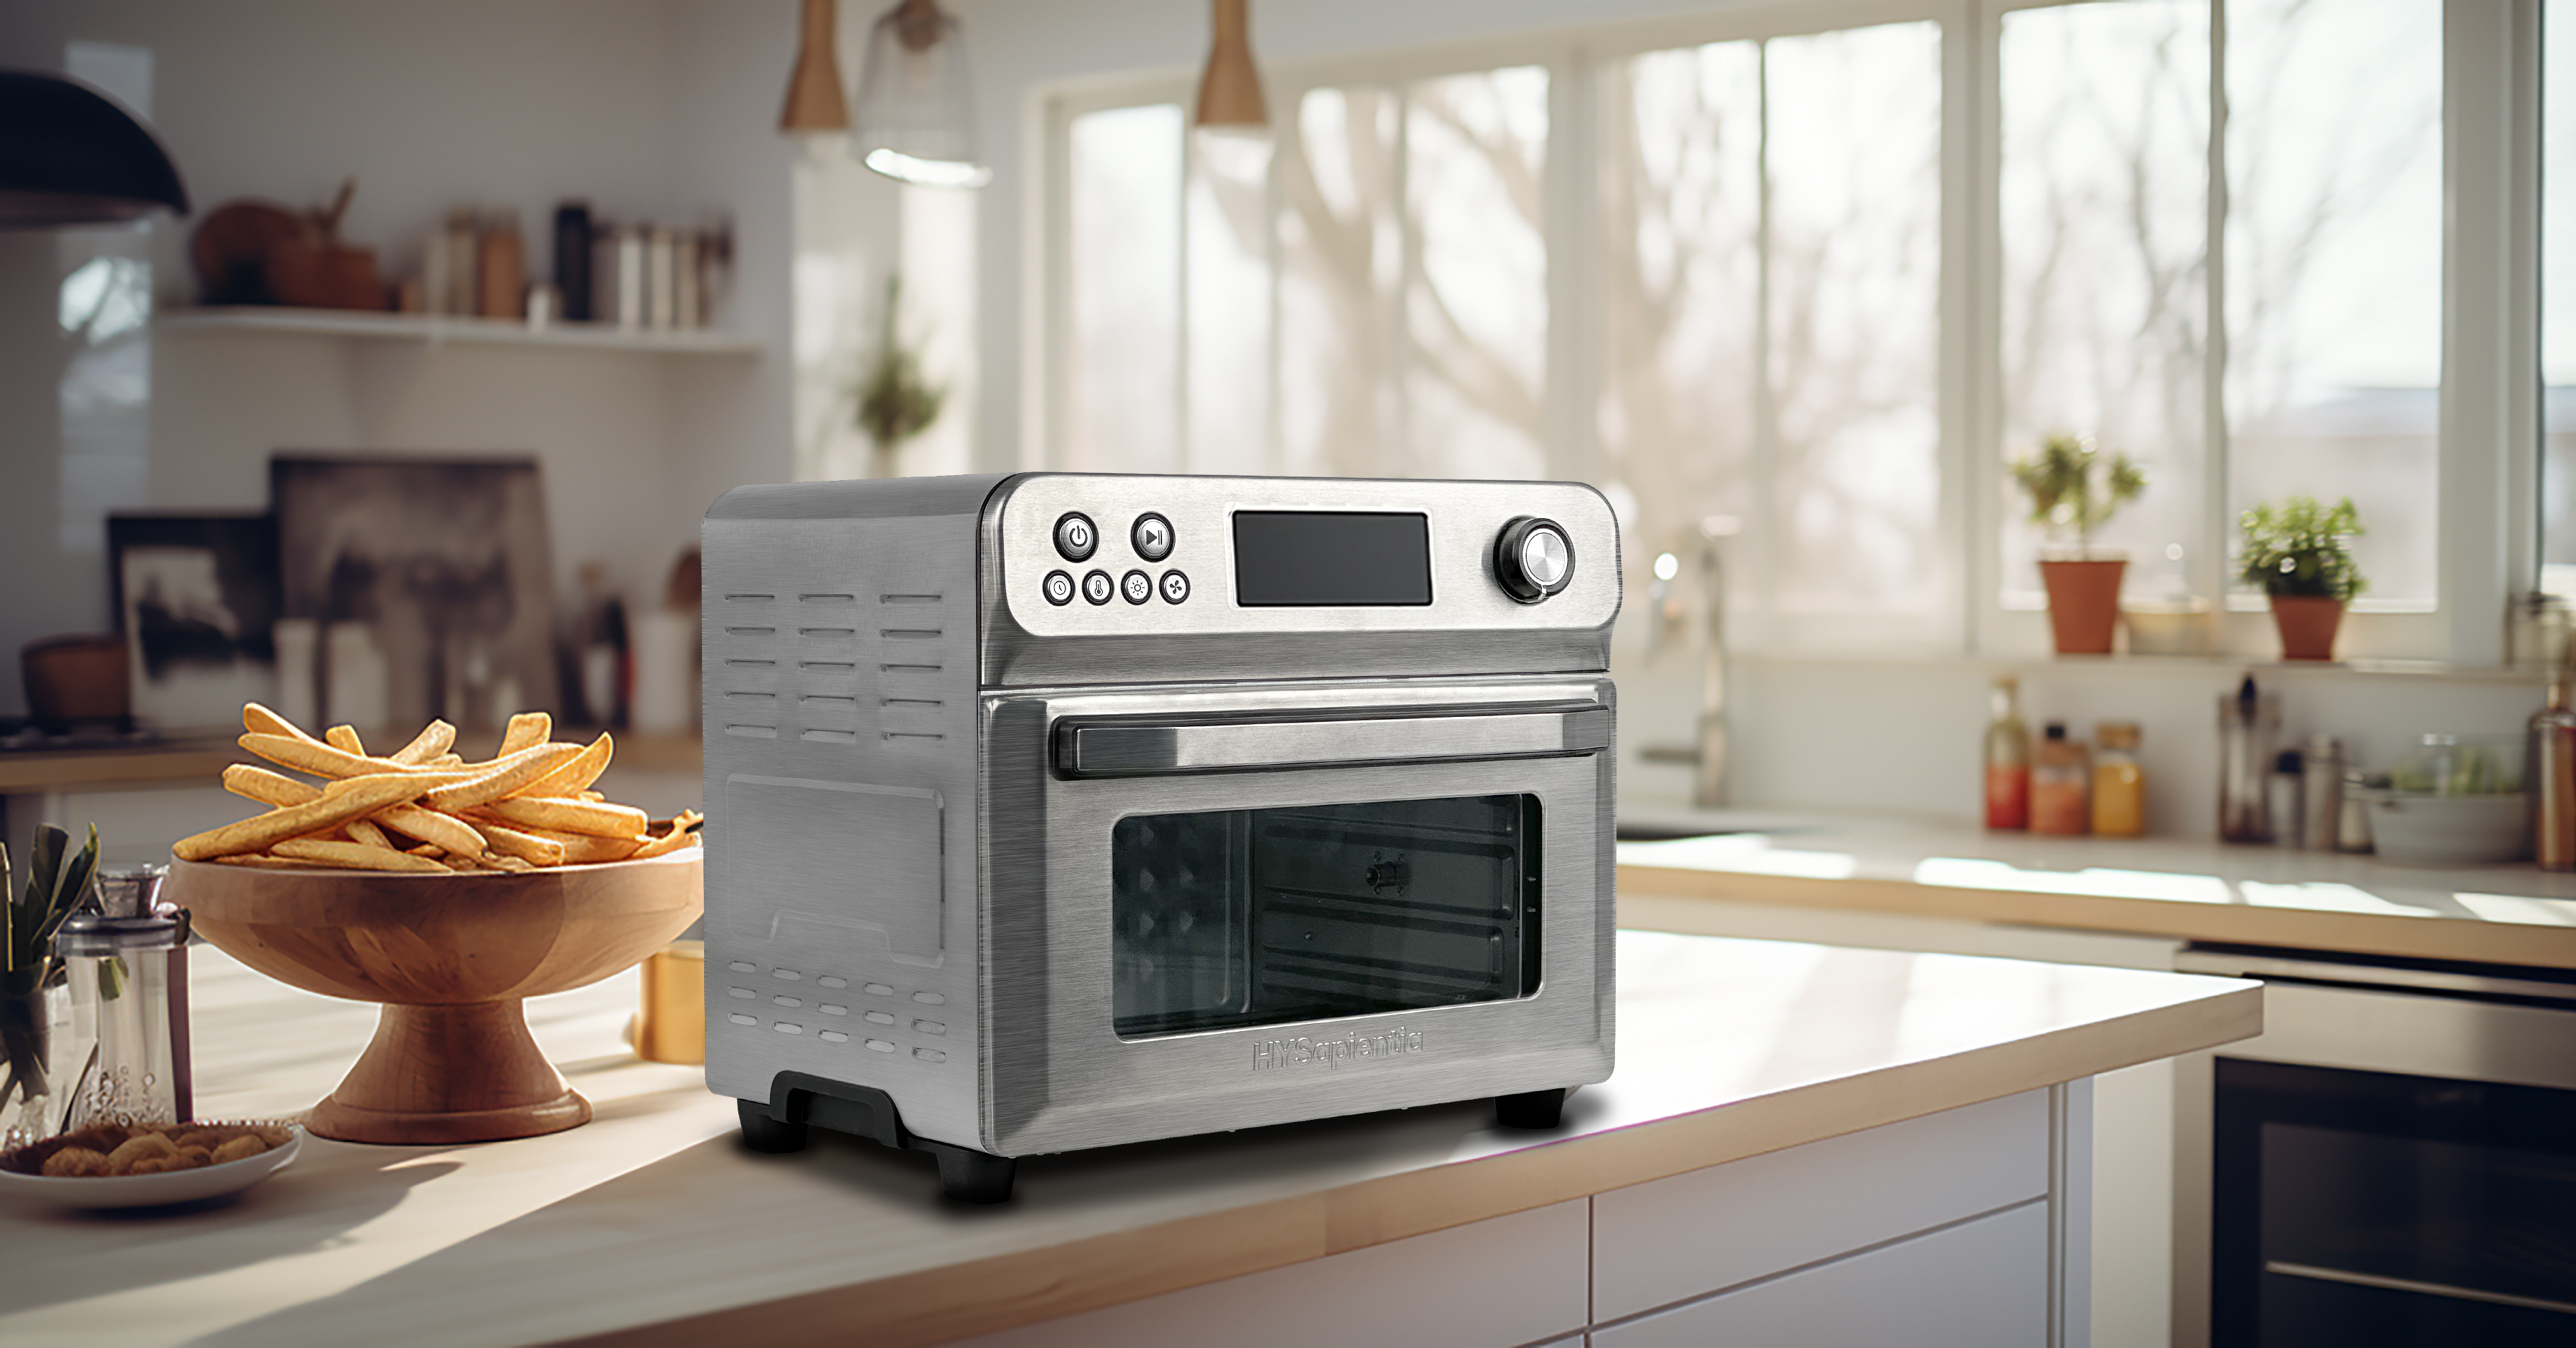 Geek insider, geekinsider, geekinsider. Com,, hysapientia introduces its 24l air fryer oven in the usa, living